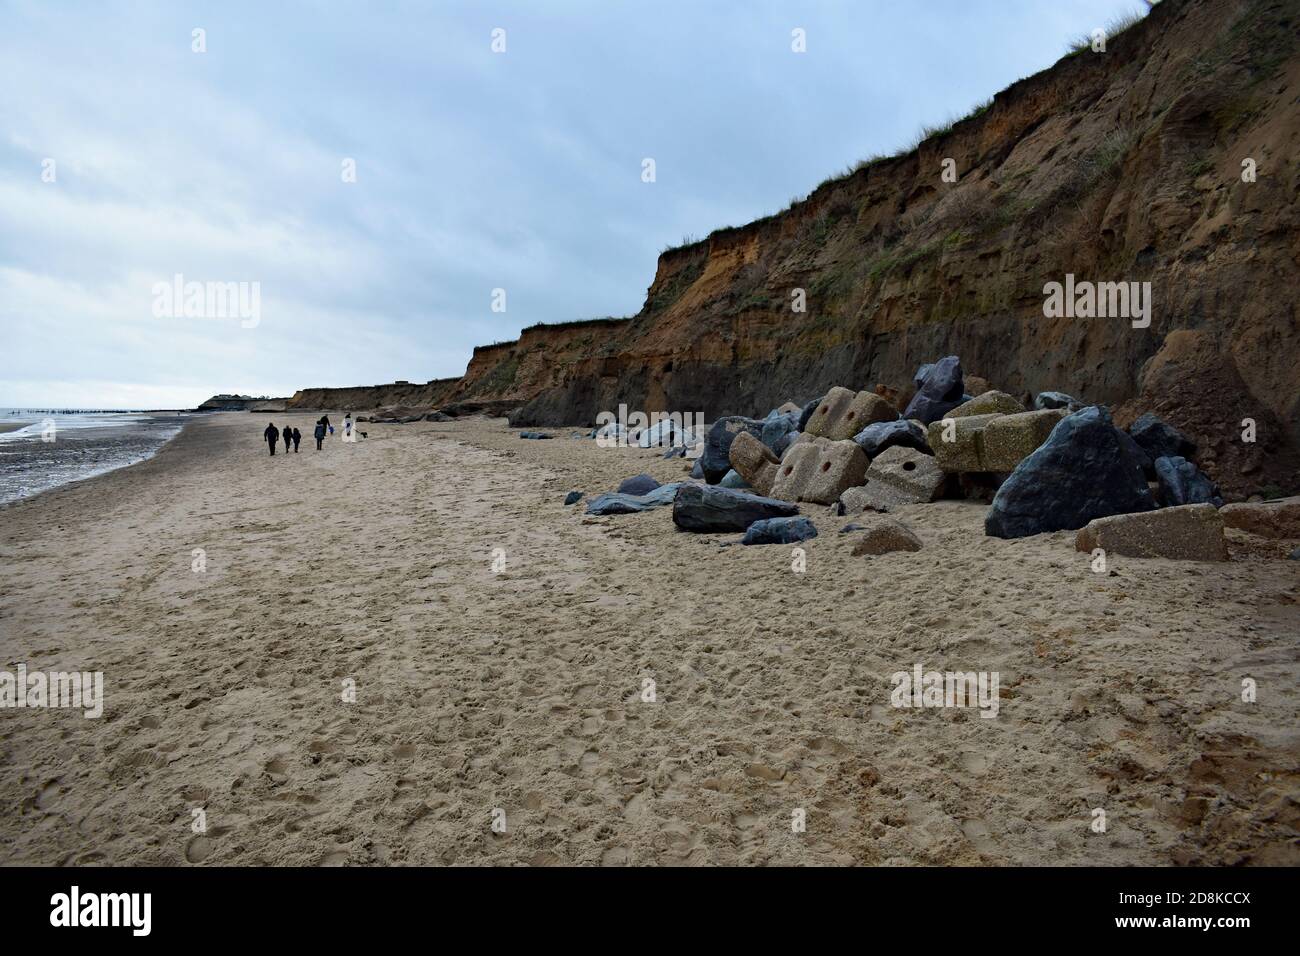 A family walk along Happisburgh Beach next to the sea cliffs that are displaying costal erosion in Norfolk, England. Large rocks stand along the cliff. Stock Photo